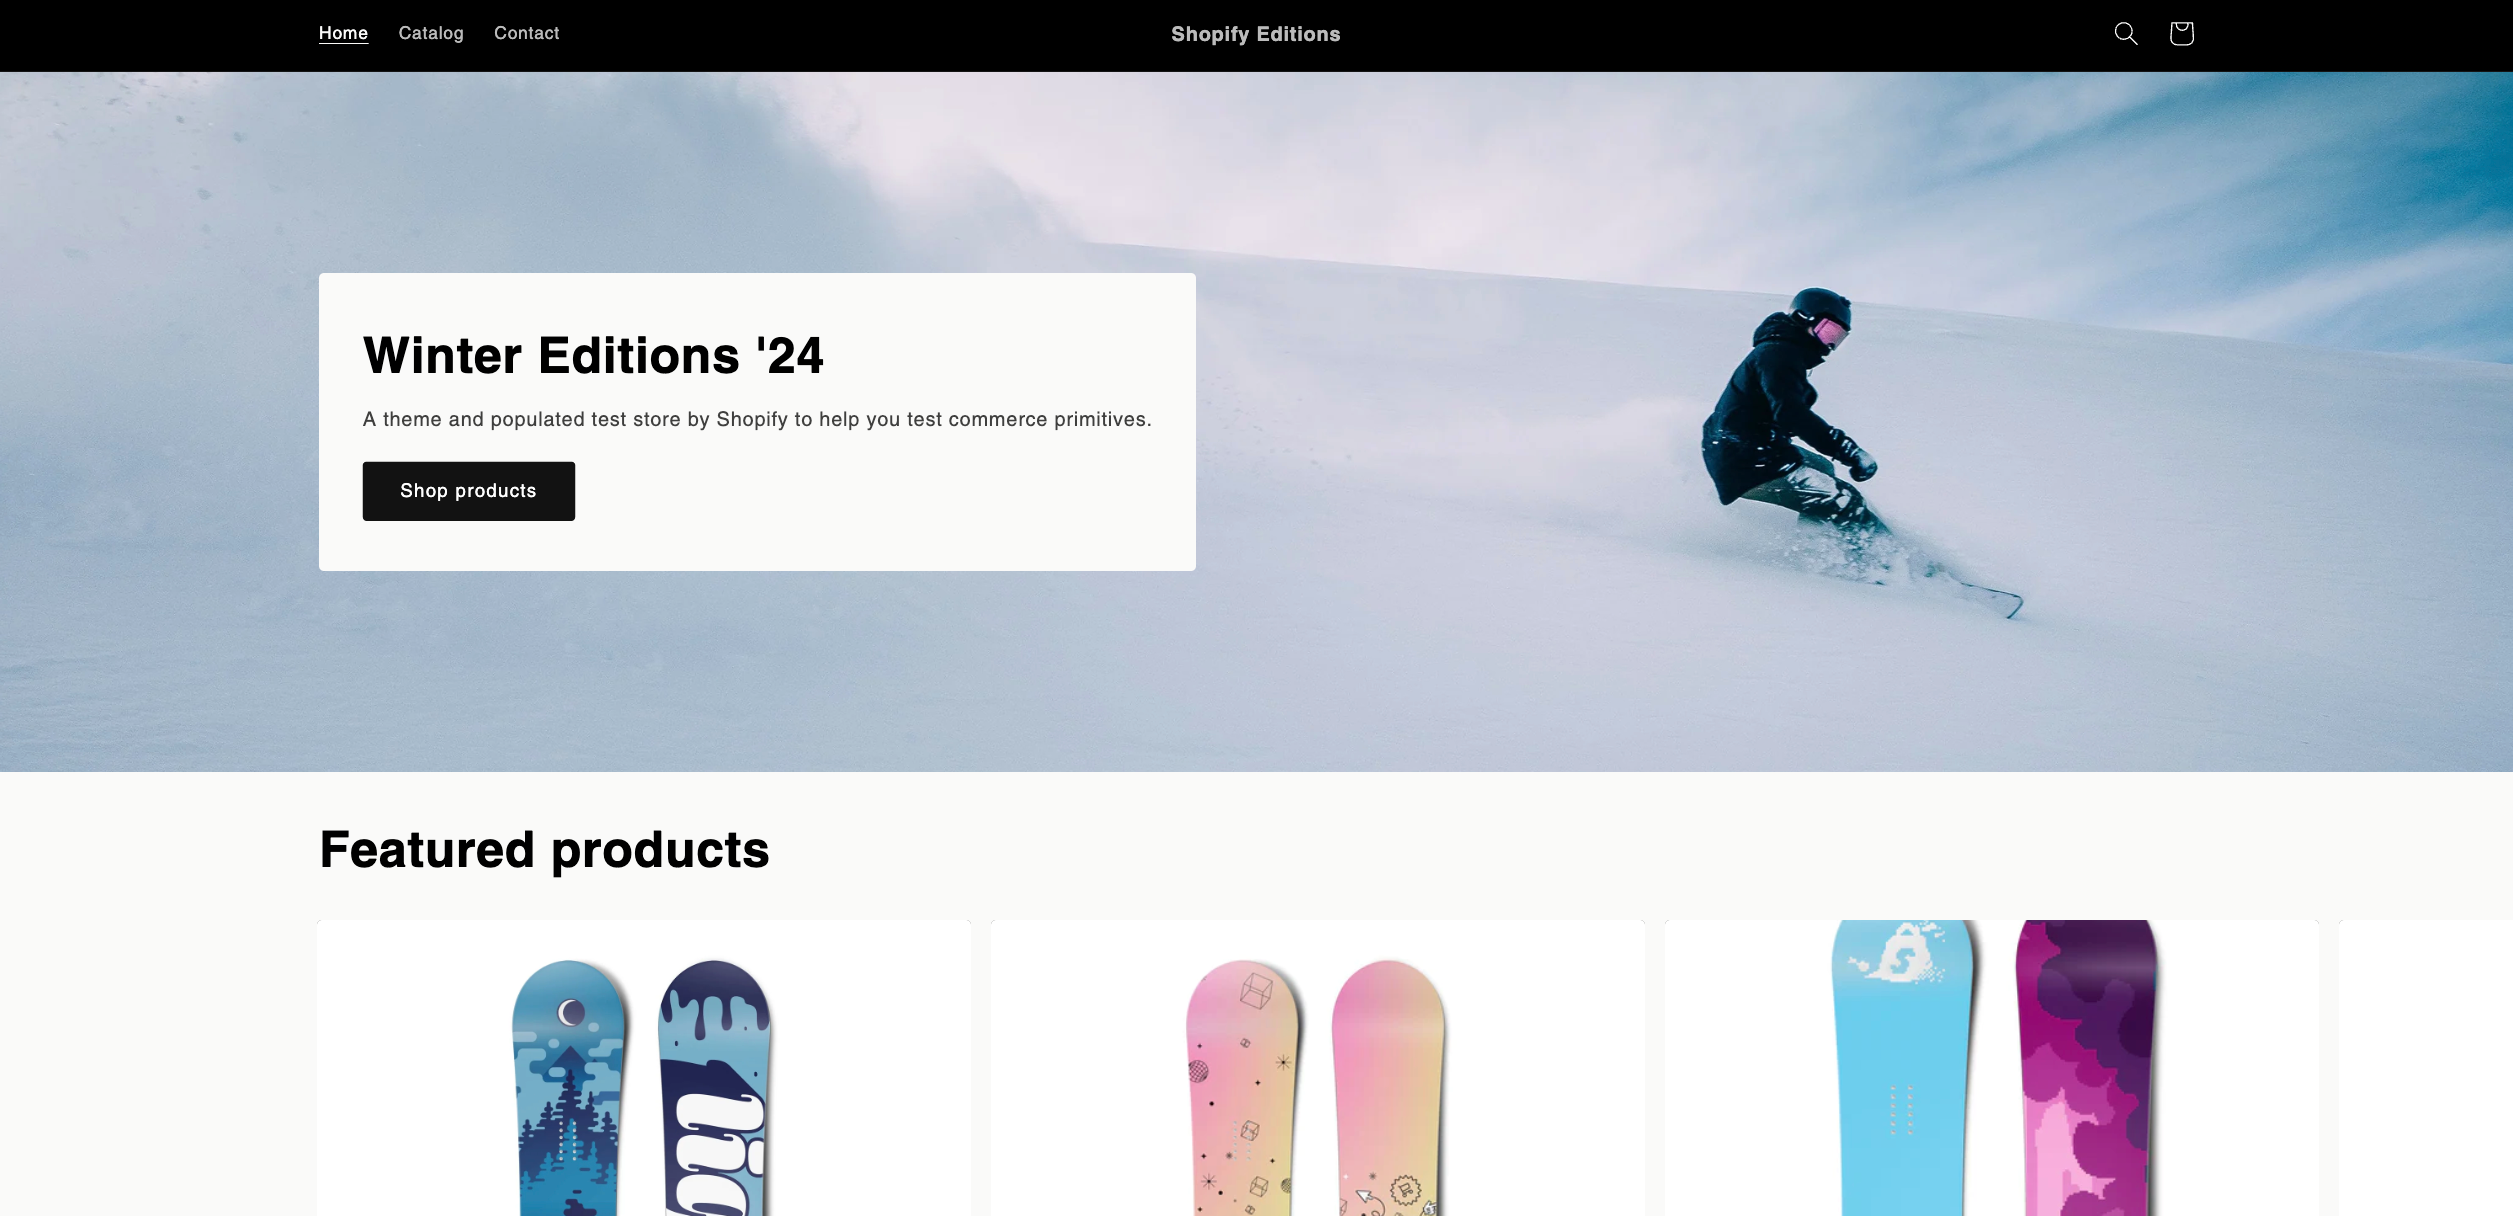 Shopify Editions - Winter 24